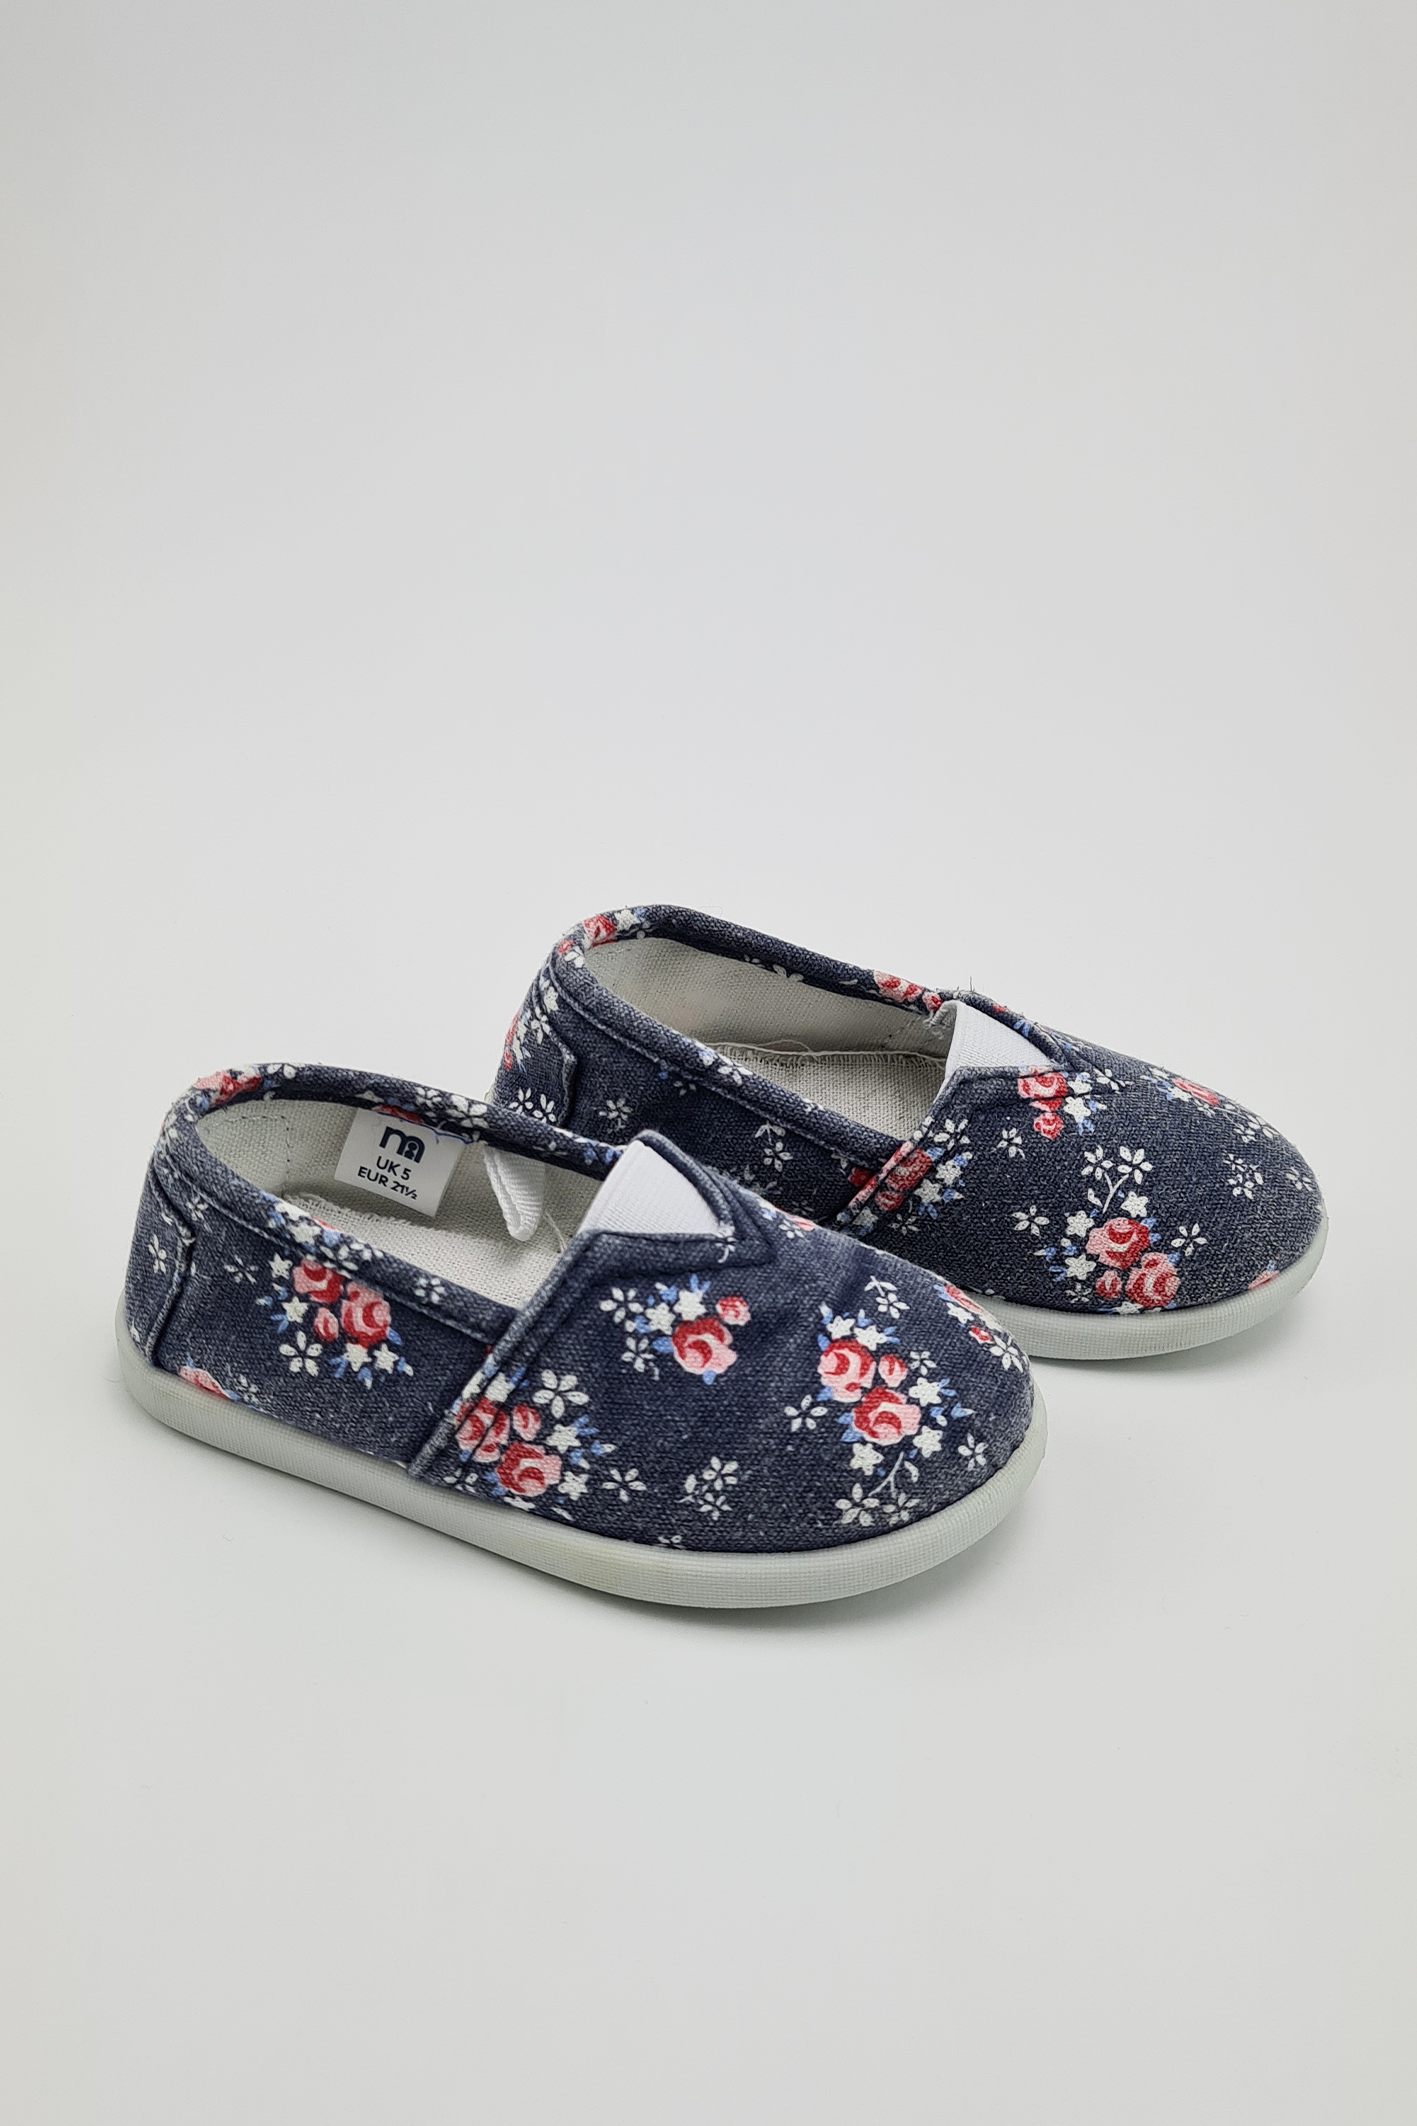 Size 5 - Floral Slip-on Trainers - Precuddled.com